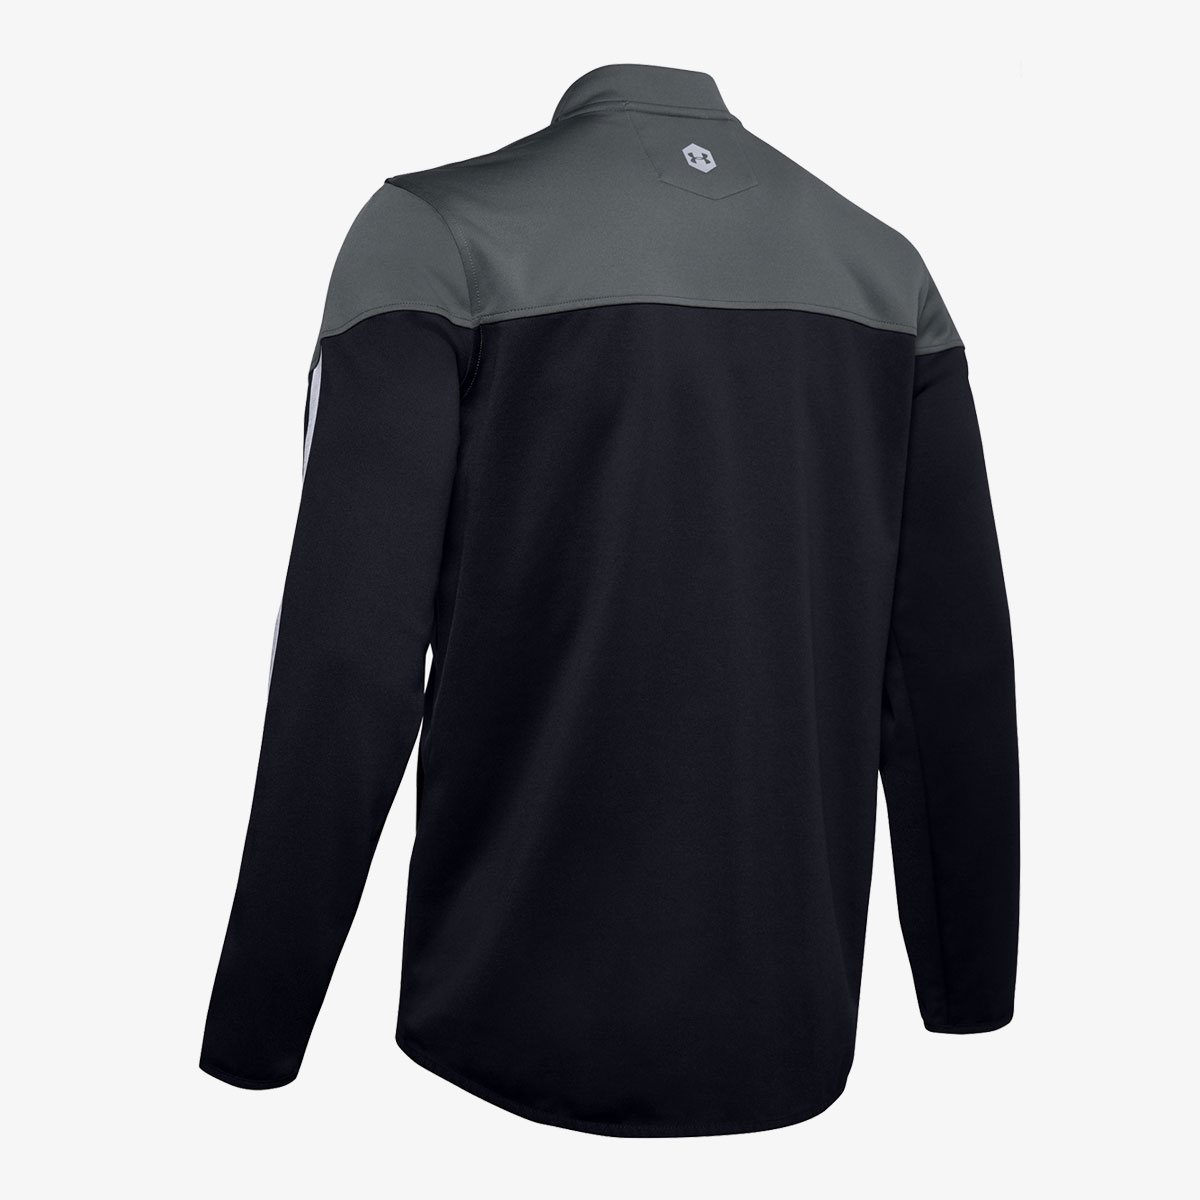 Under Armour Athlete Recovery Knit Warm Up Top 